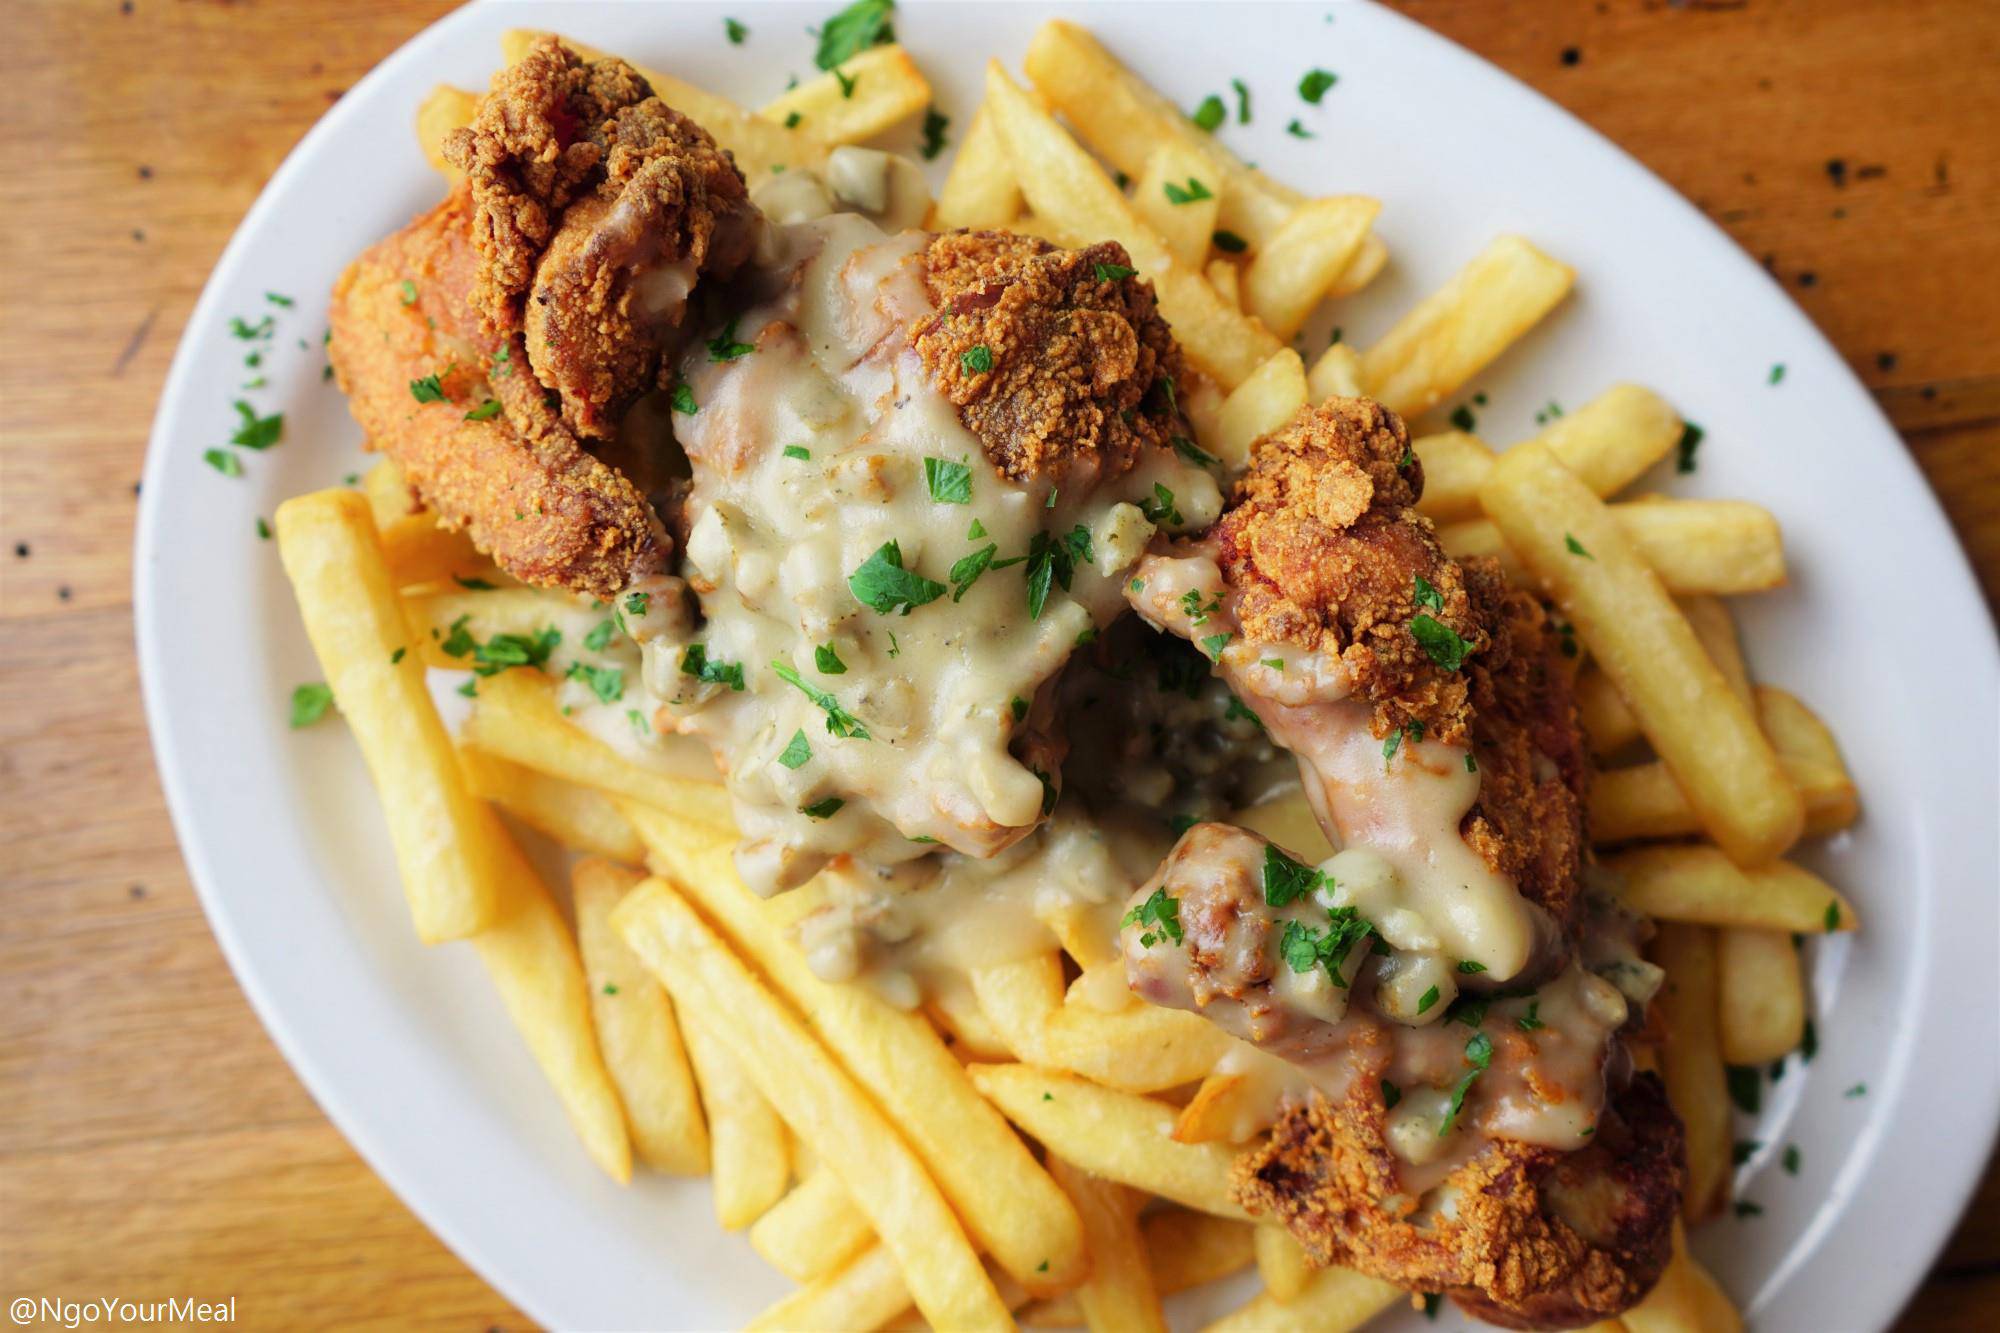 Buttermilk Fried Chicken with French Fries at Milkweed in Boston